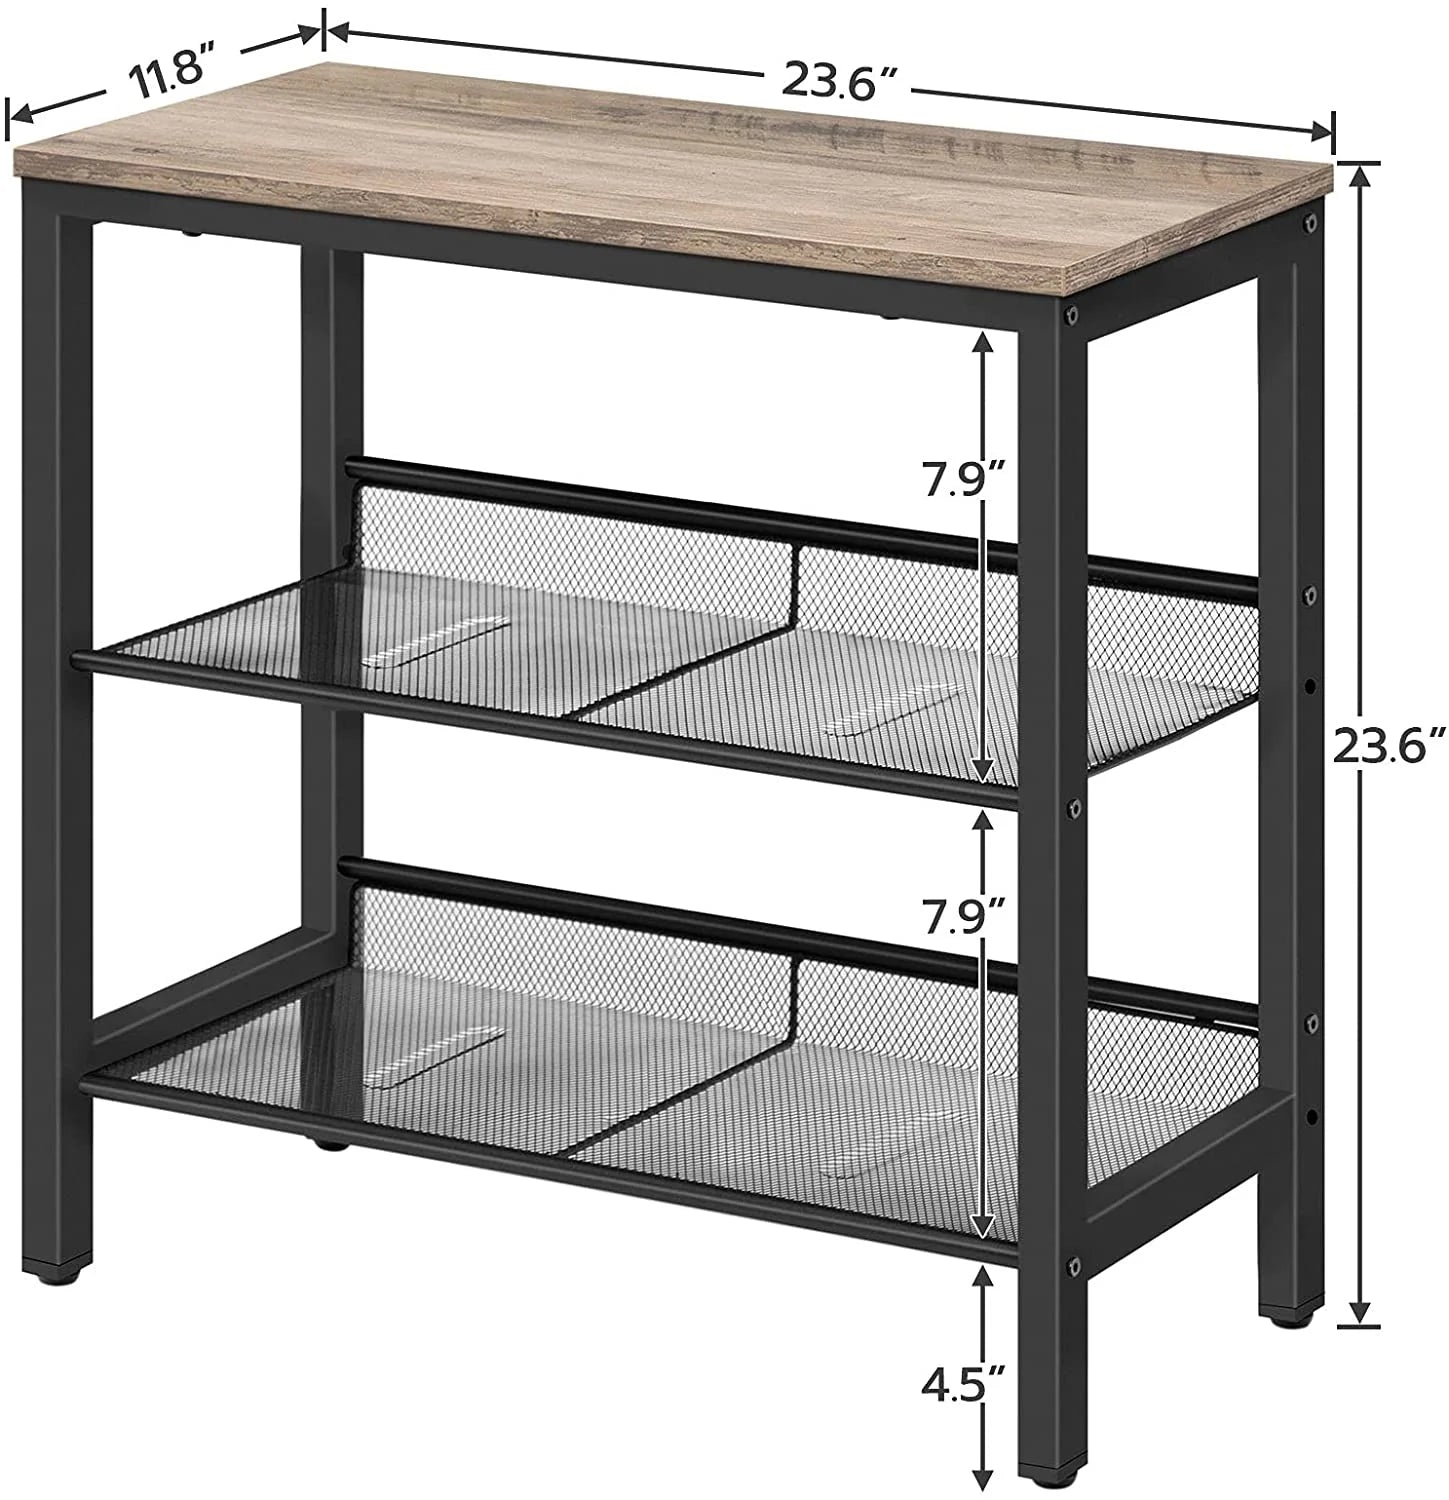 Side Tables: 2 Flat or Slant Adjustable Shelves for Small Spaces, Hallway, Living Room, Sturdy Greige and Black